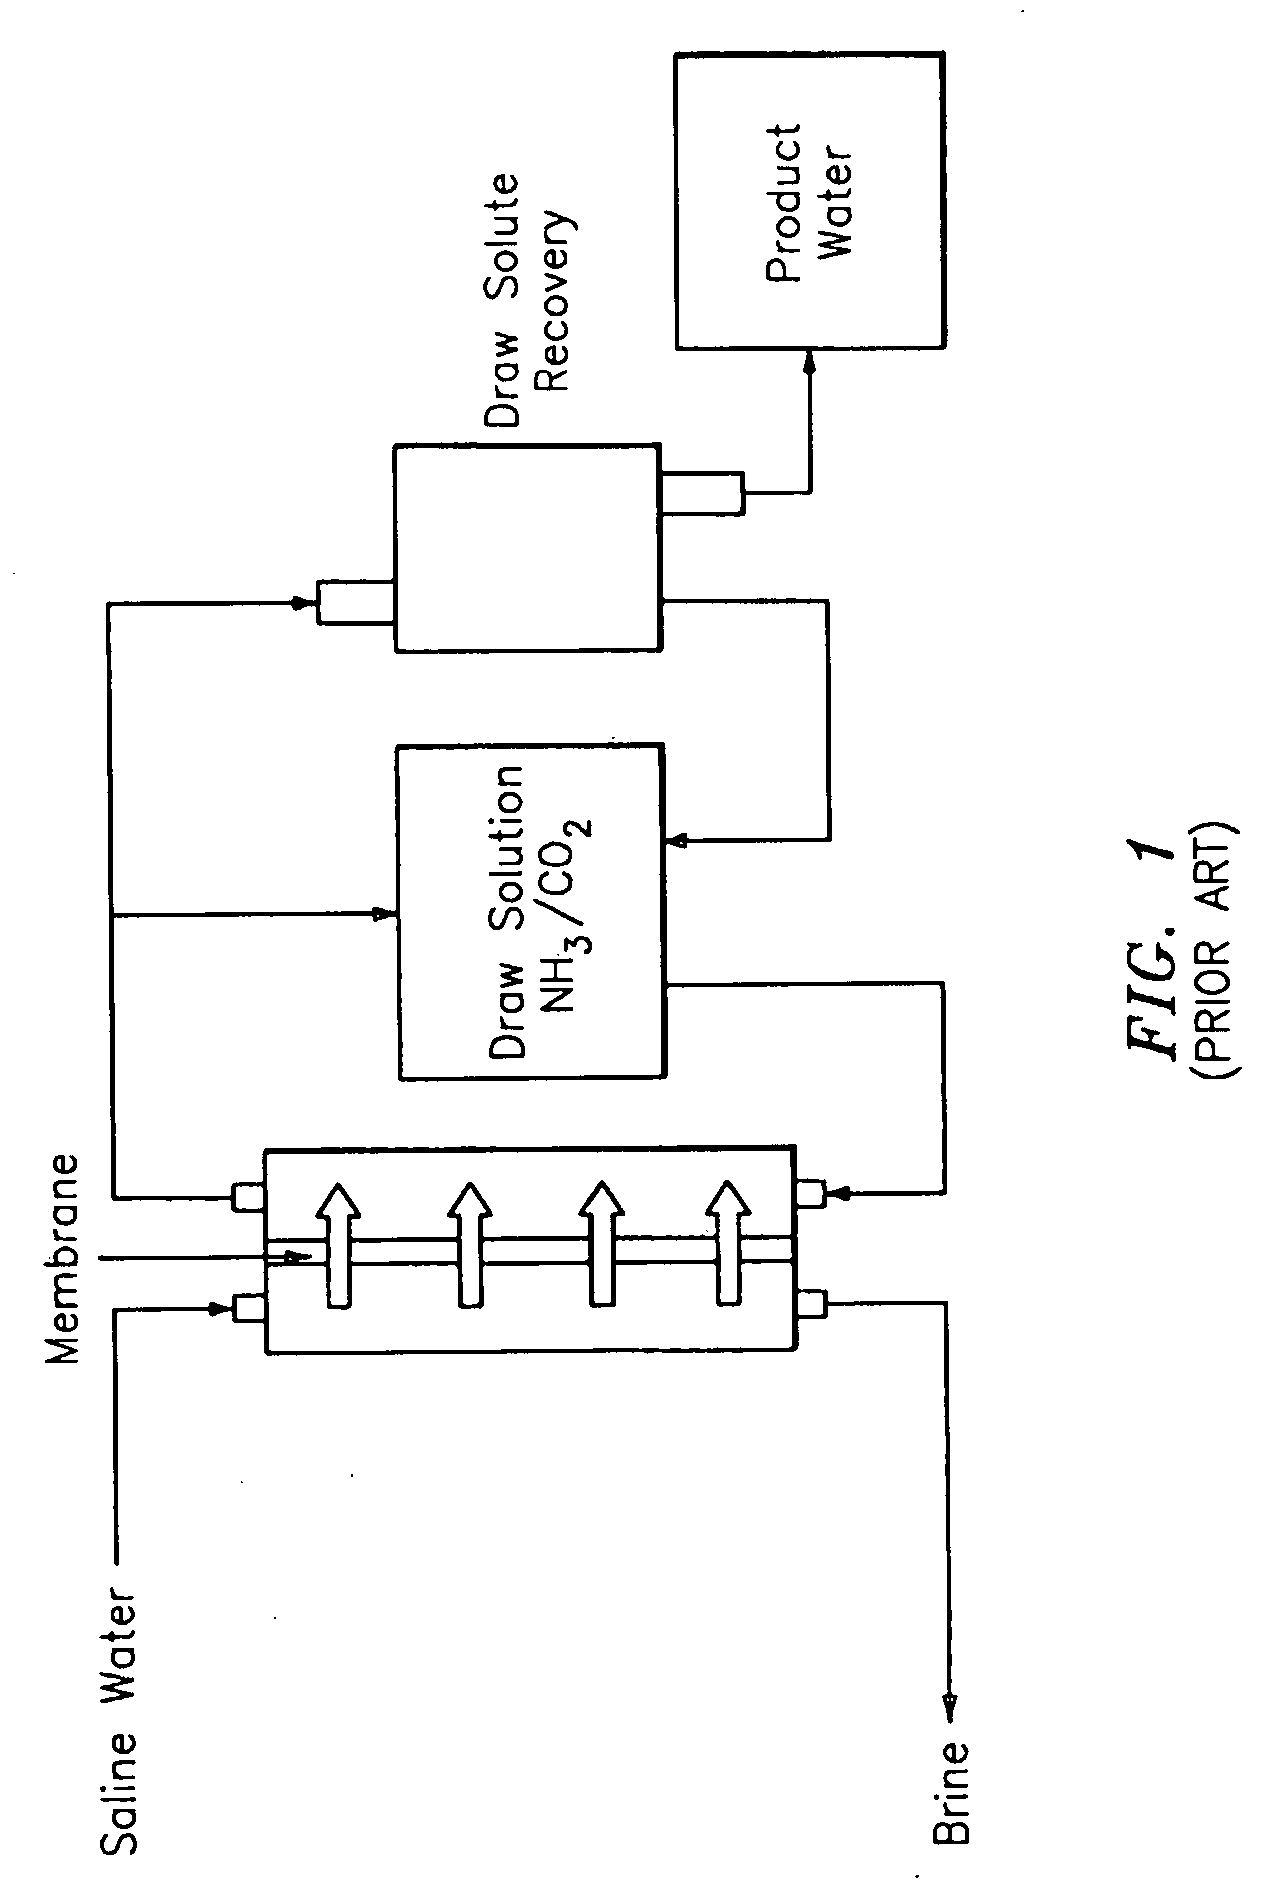 Multi-Stage Column Distillation (MSCD) Method for Osmotic Solute Recovery